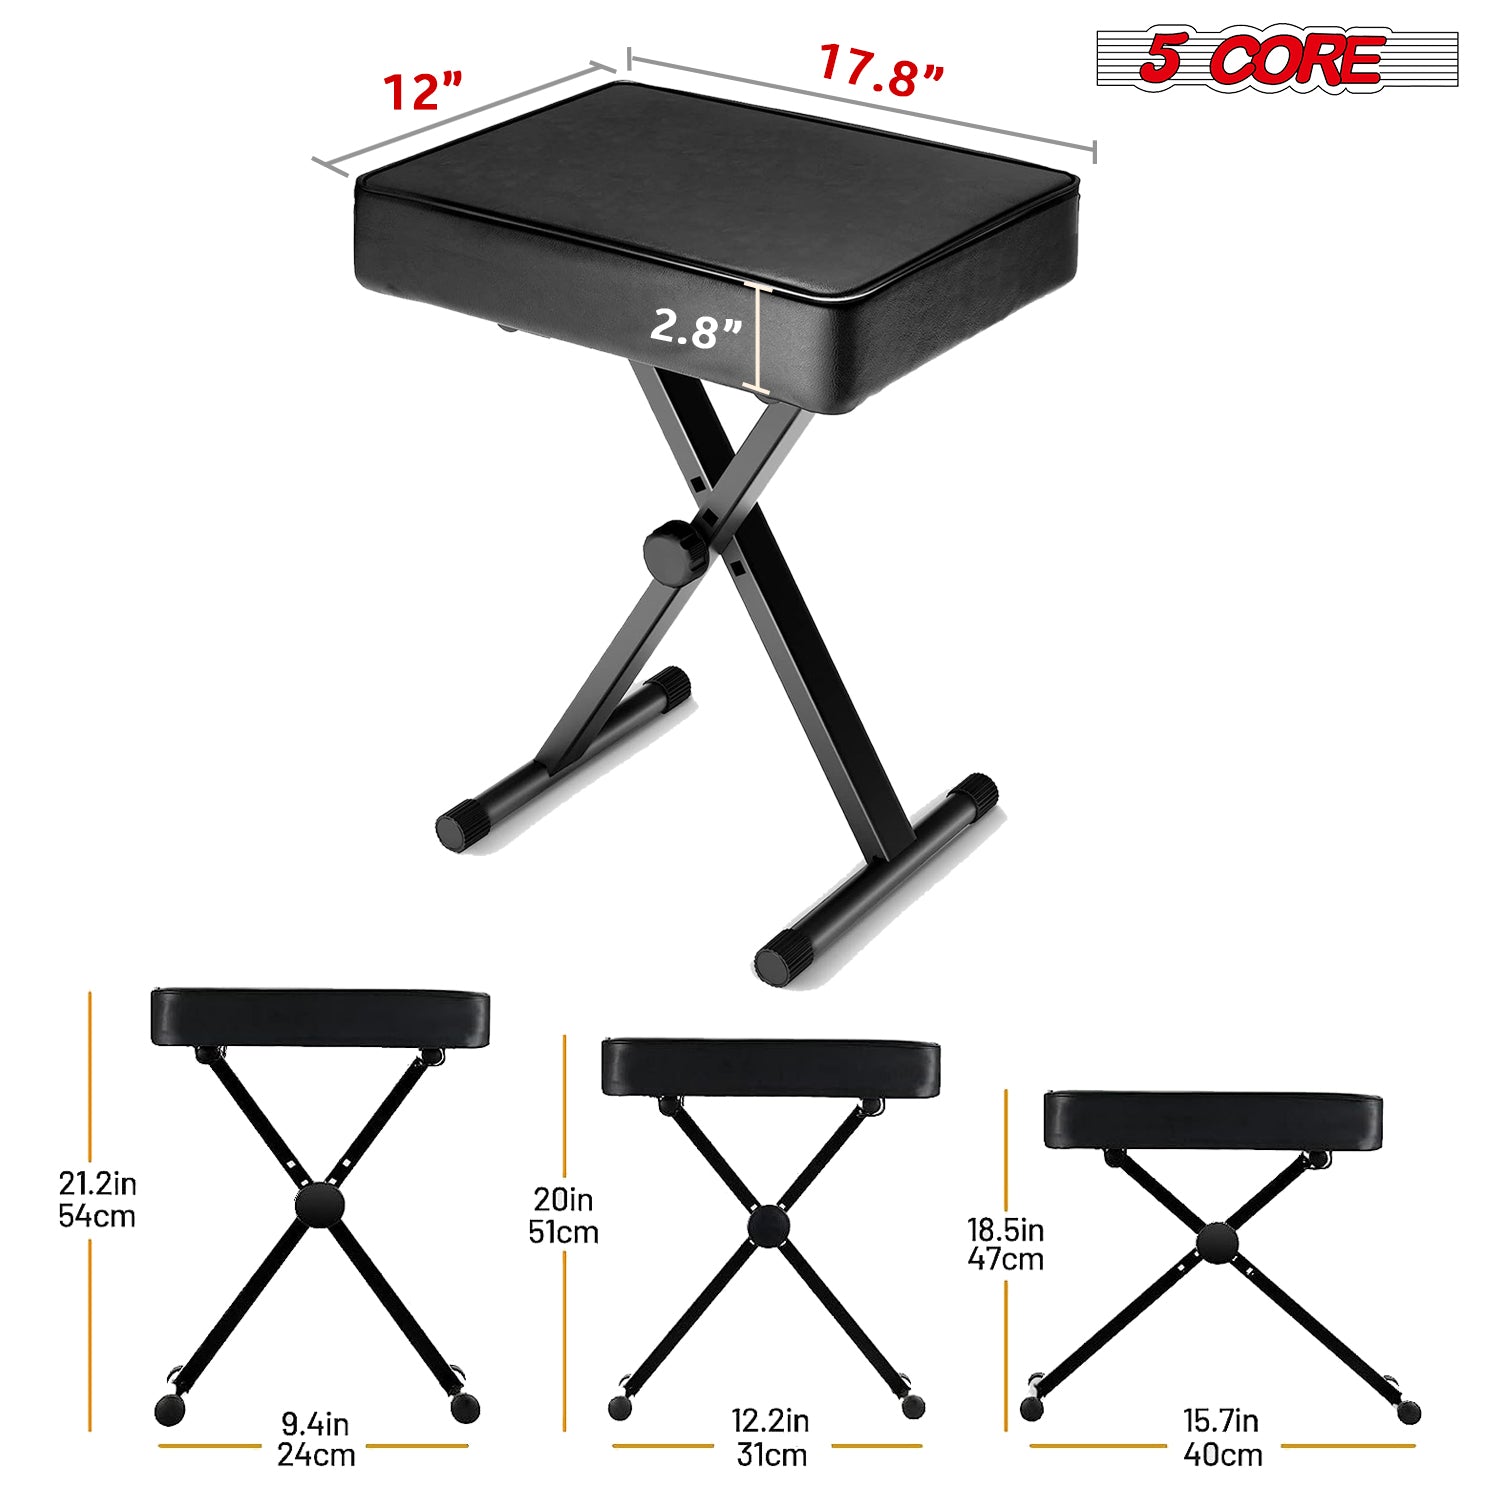 5 Core Adjustable Keyboard Bench 18.5 - 21.2 Inch Heavy Duty X style Bench Piano Stool Chair Thick And Padded Comfortable Guitar Stools - KBB BLK HD